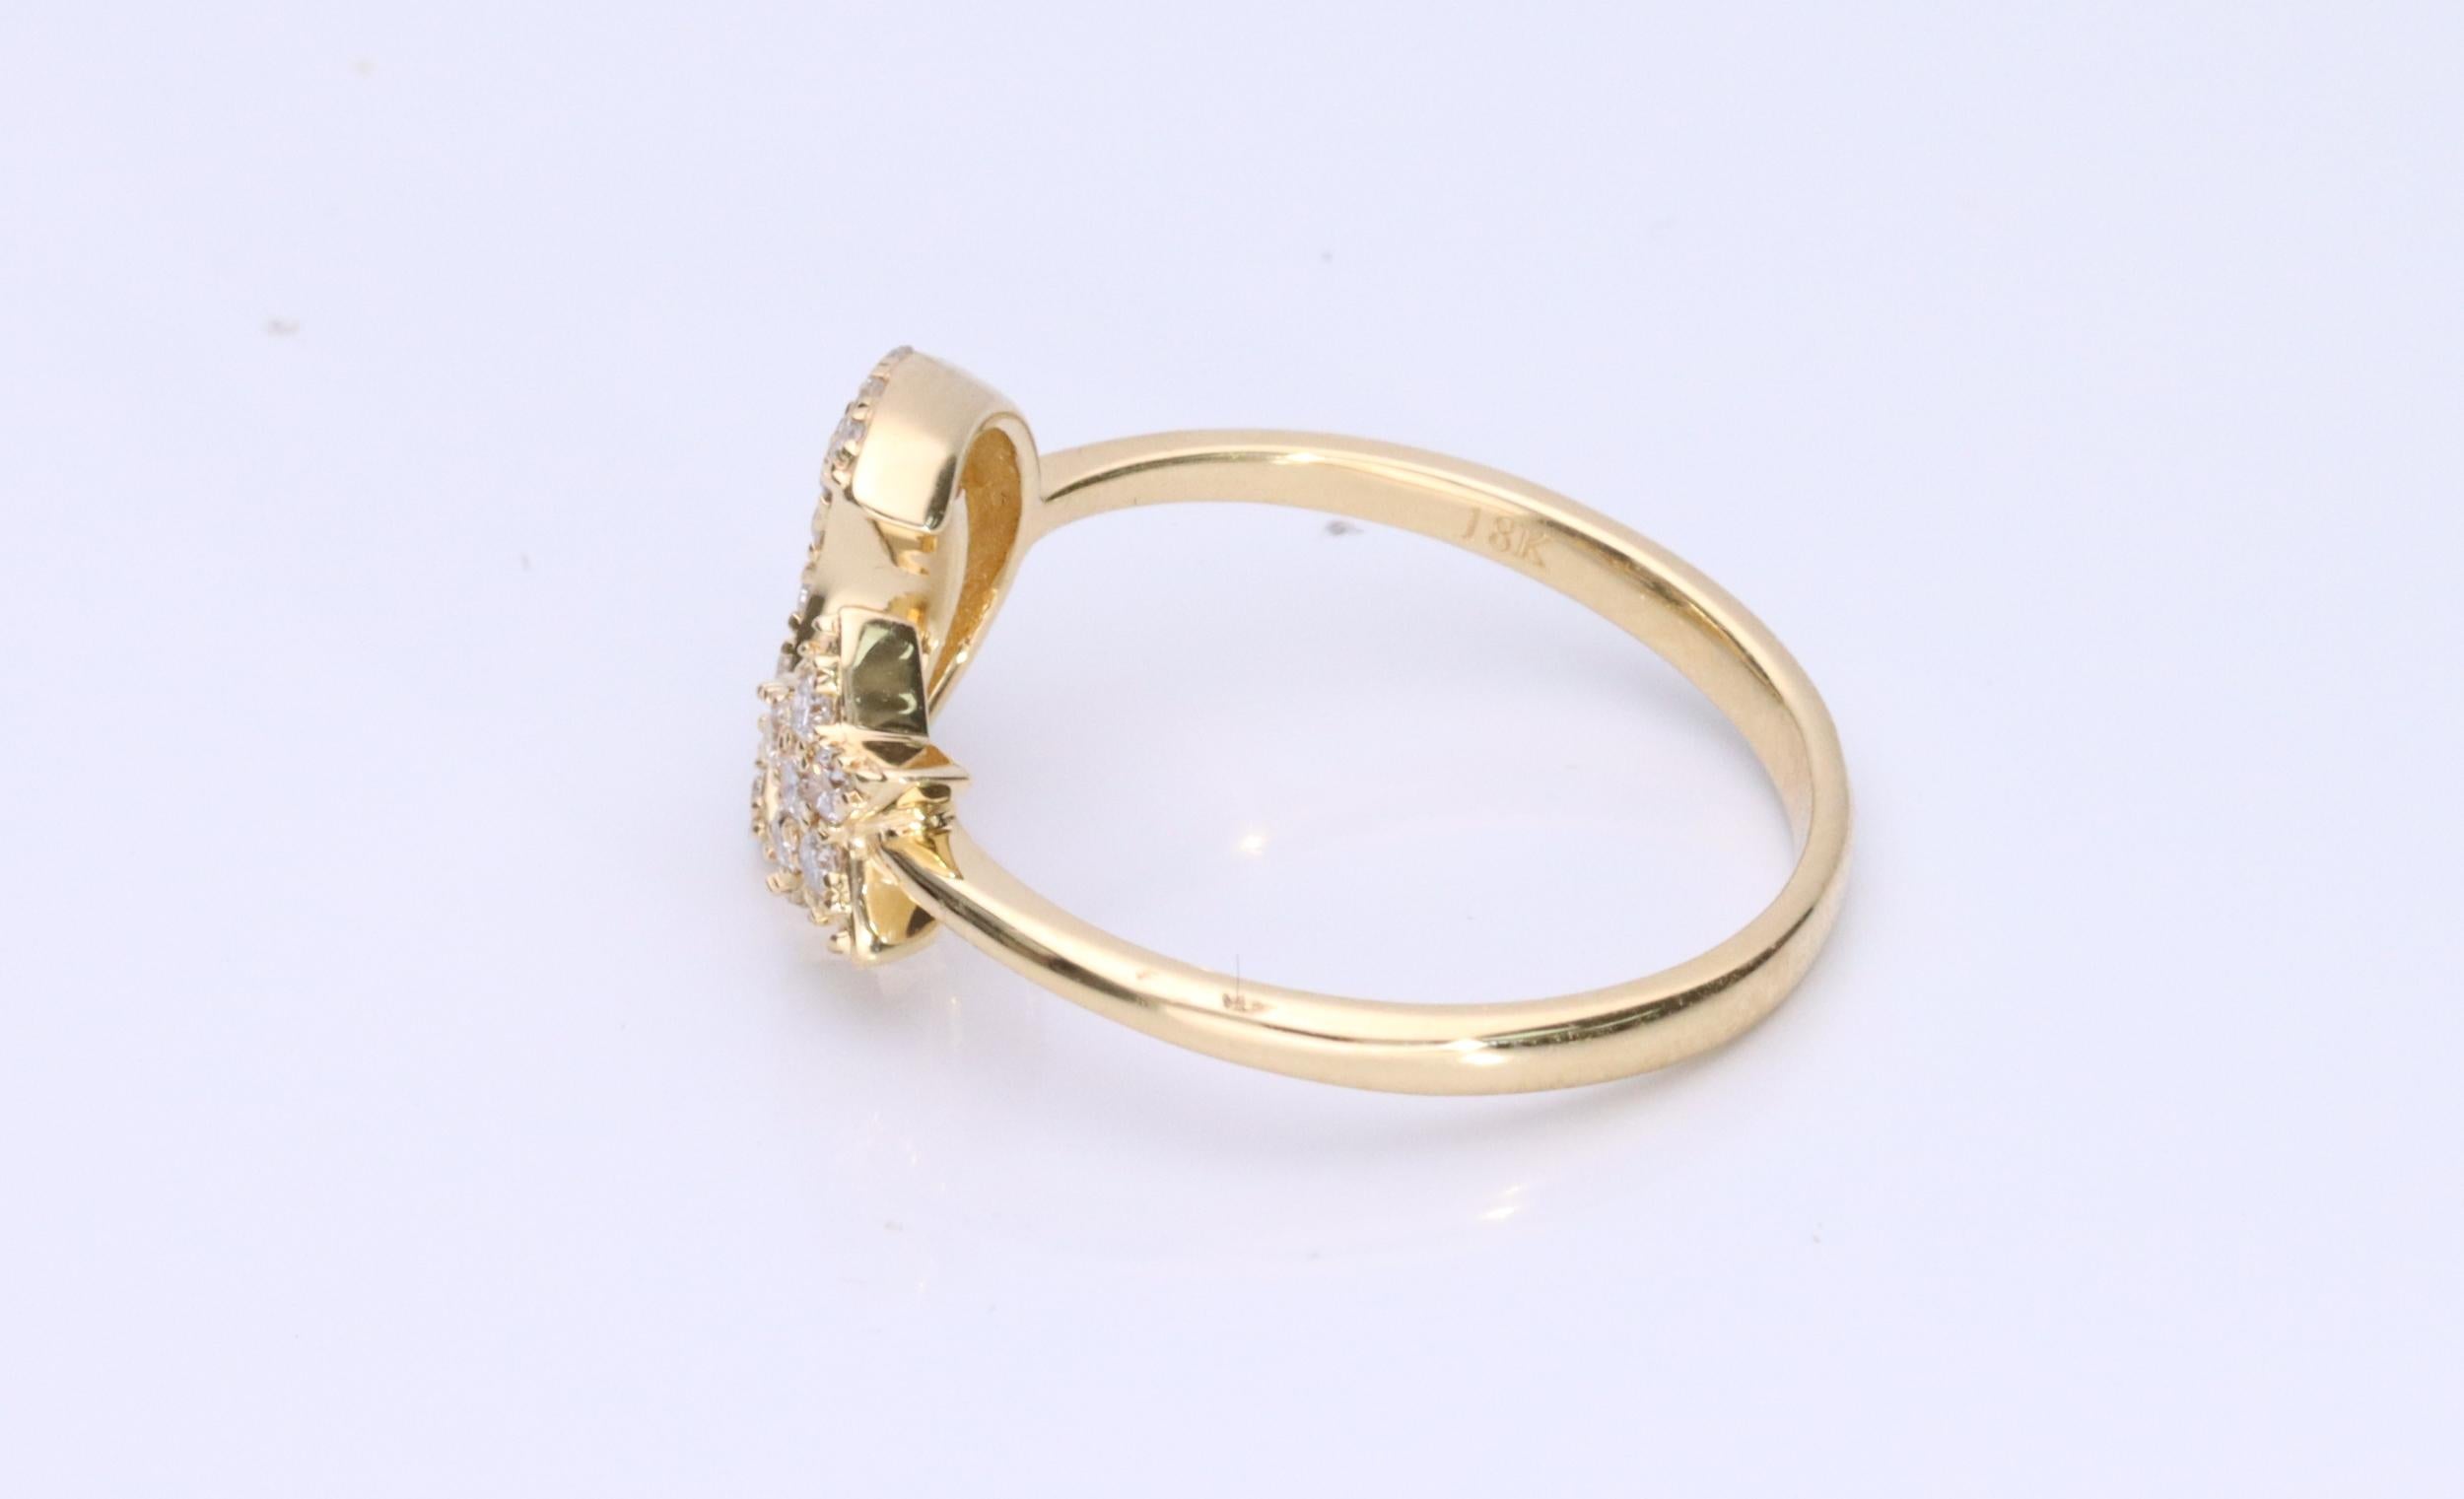 Decorate yourself in elegance with this Ring is crafted from 18-karat Yellow Gold by Gin & Grace. This Ring is made up of  Round-cut White Diamond (21 Pcs) 0.27 carat. This Ring is weight 2.62 grams. This delicate ring is polished to a high finish